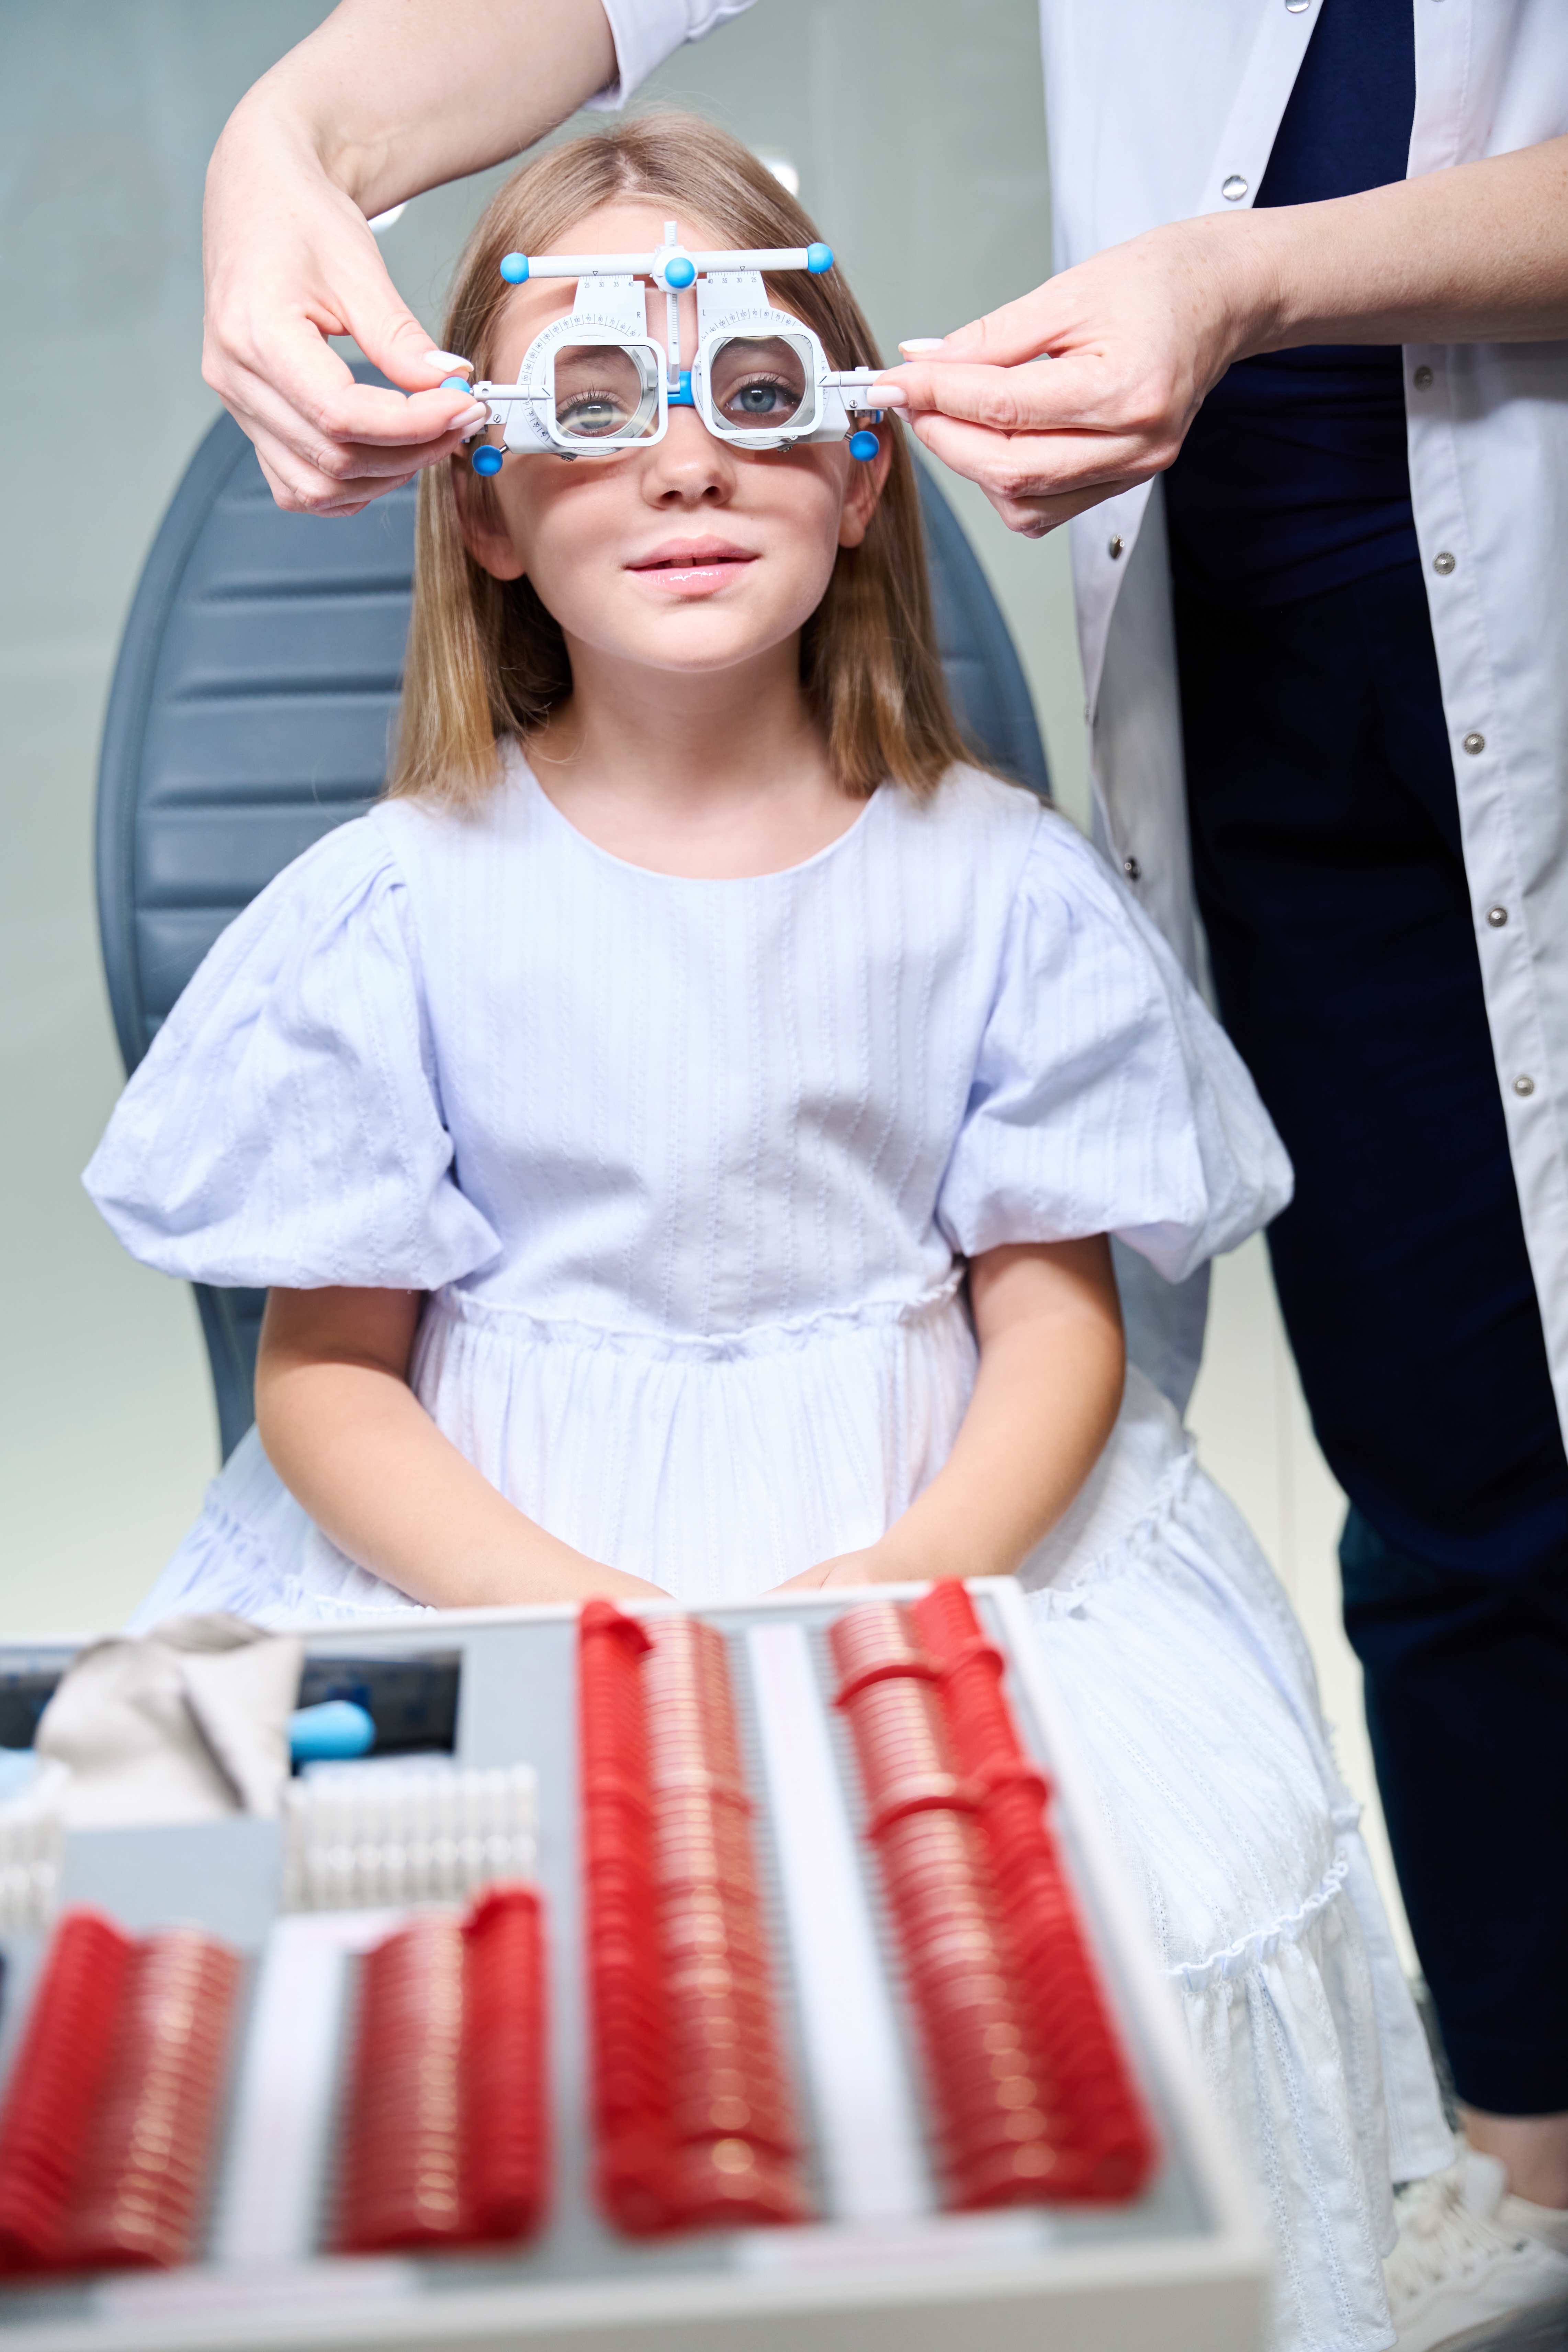 Tranquil little girl taking subjective refraction test in ophthalmologist office